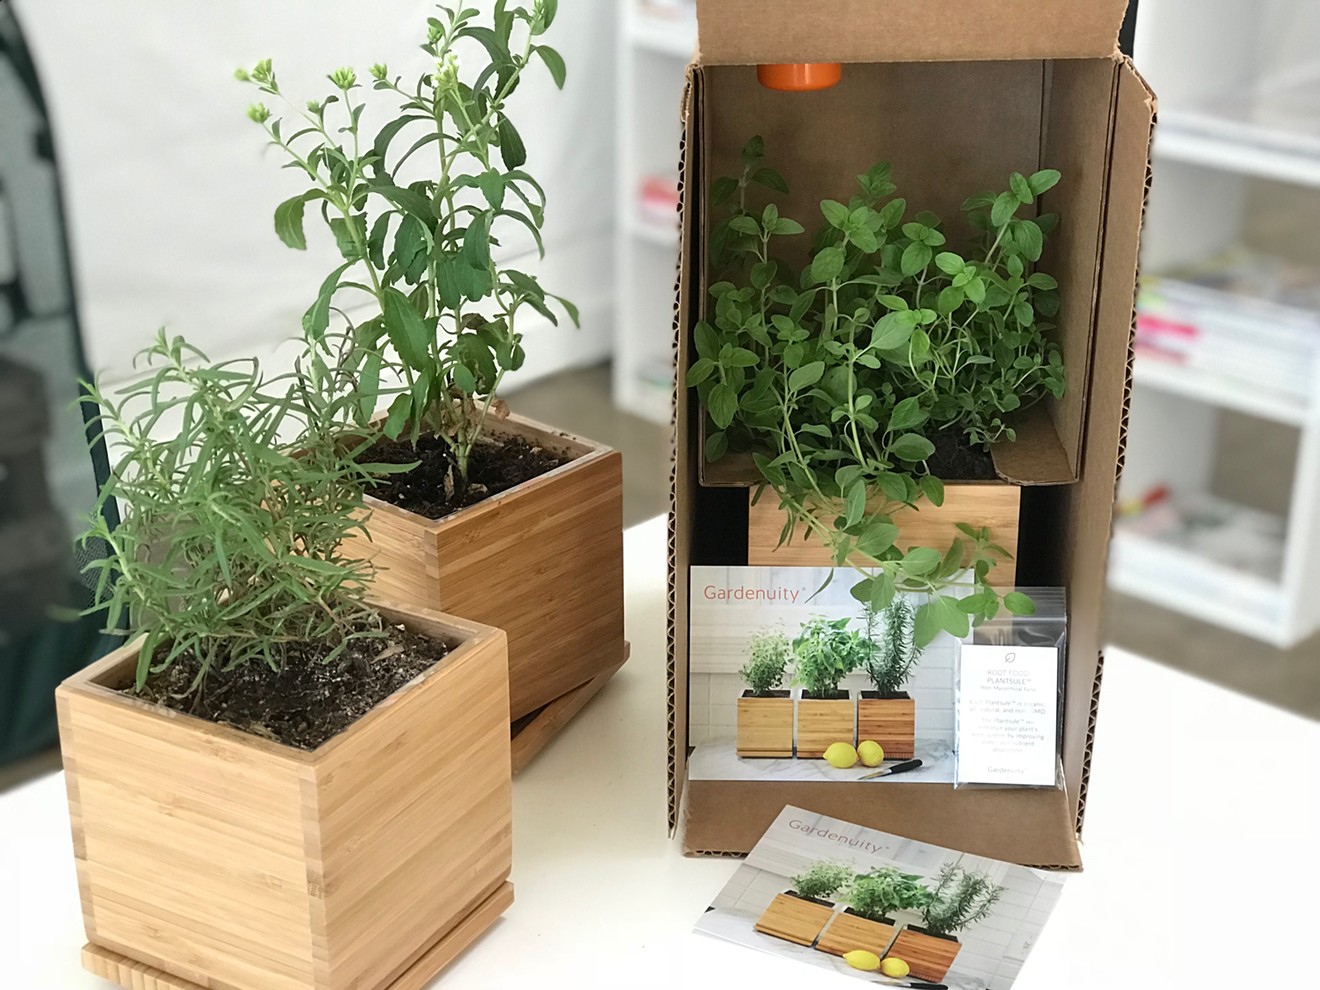 A new Dallas company will send you everything you need to grow herbs and vegetables at home, even if you live in a downtown high-rise.